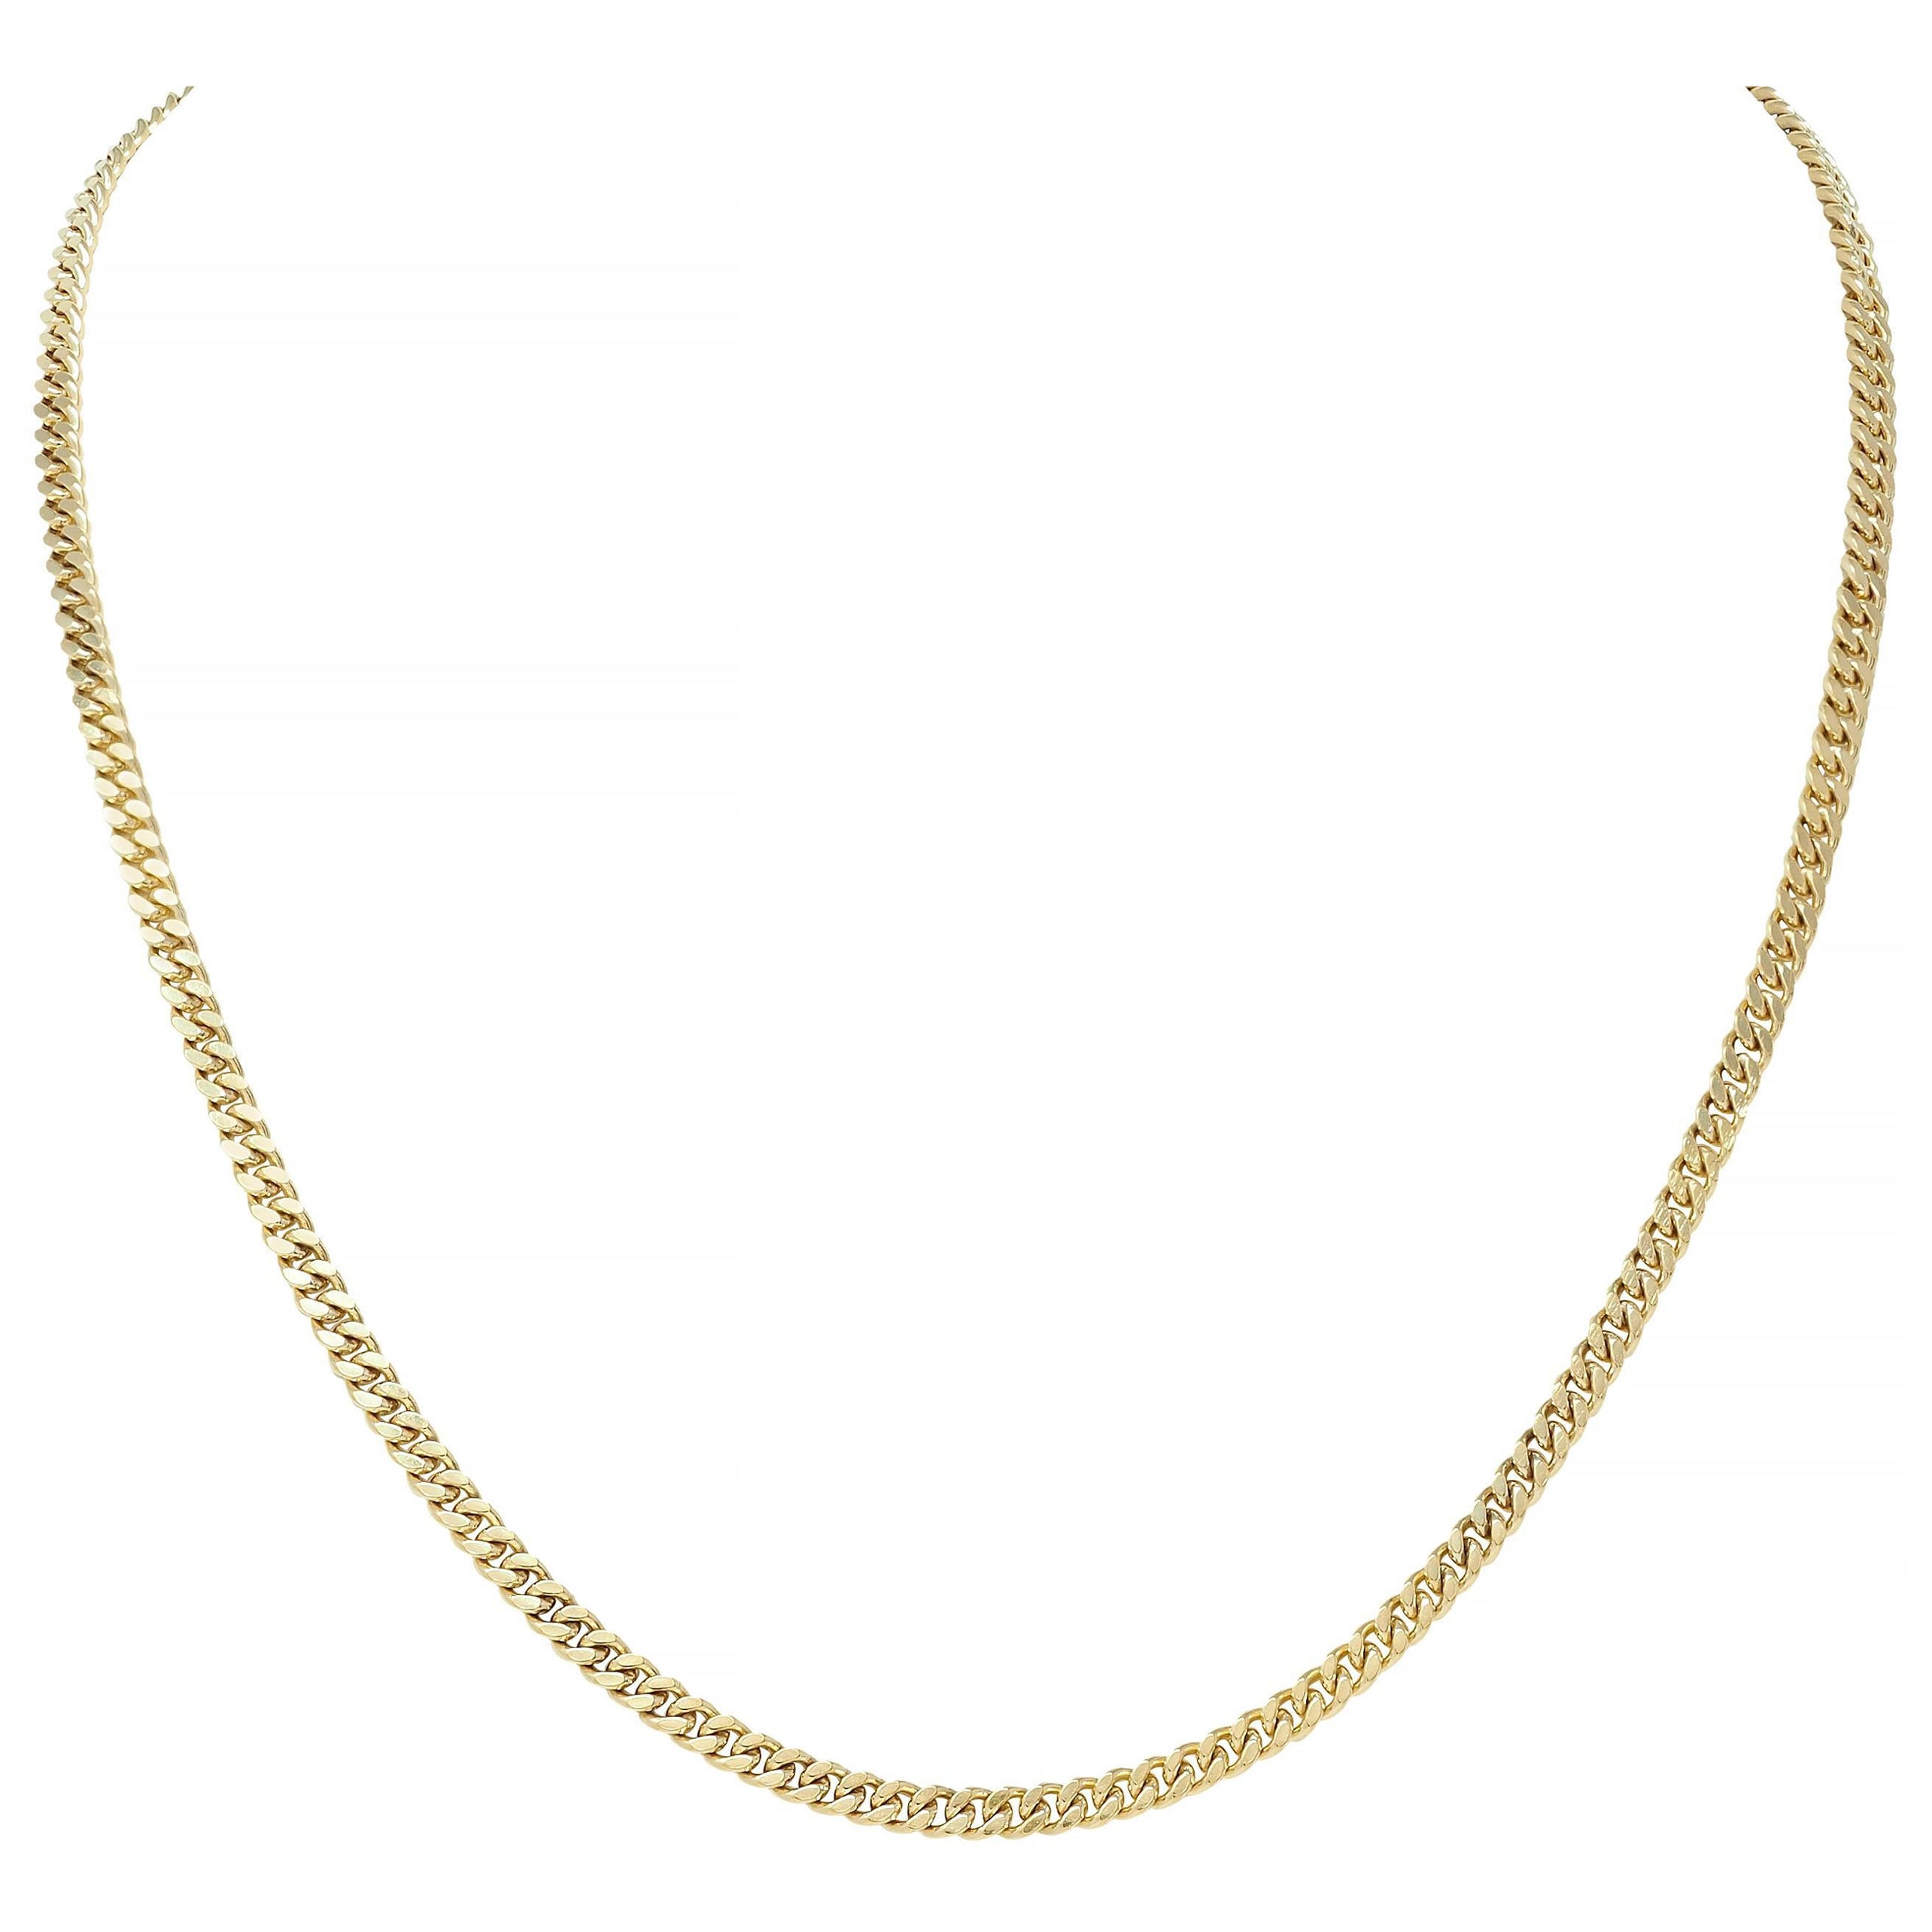 Vintage 18 Karat Yellow Gold Curb Link Chain Necklace For Sale